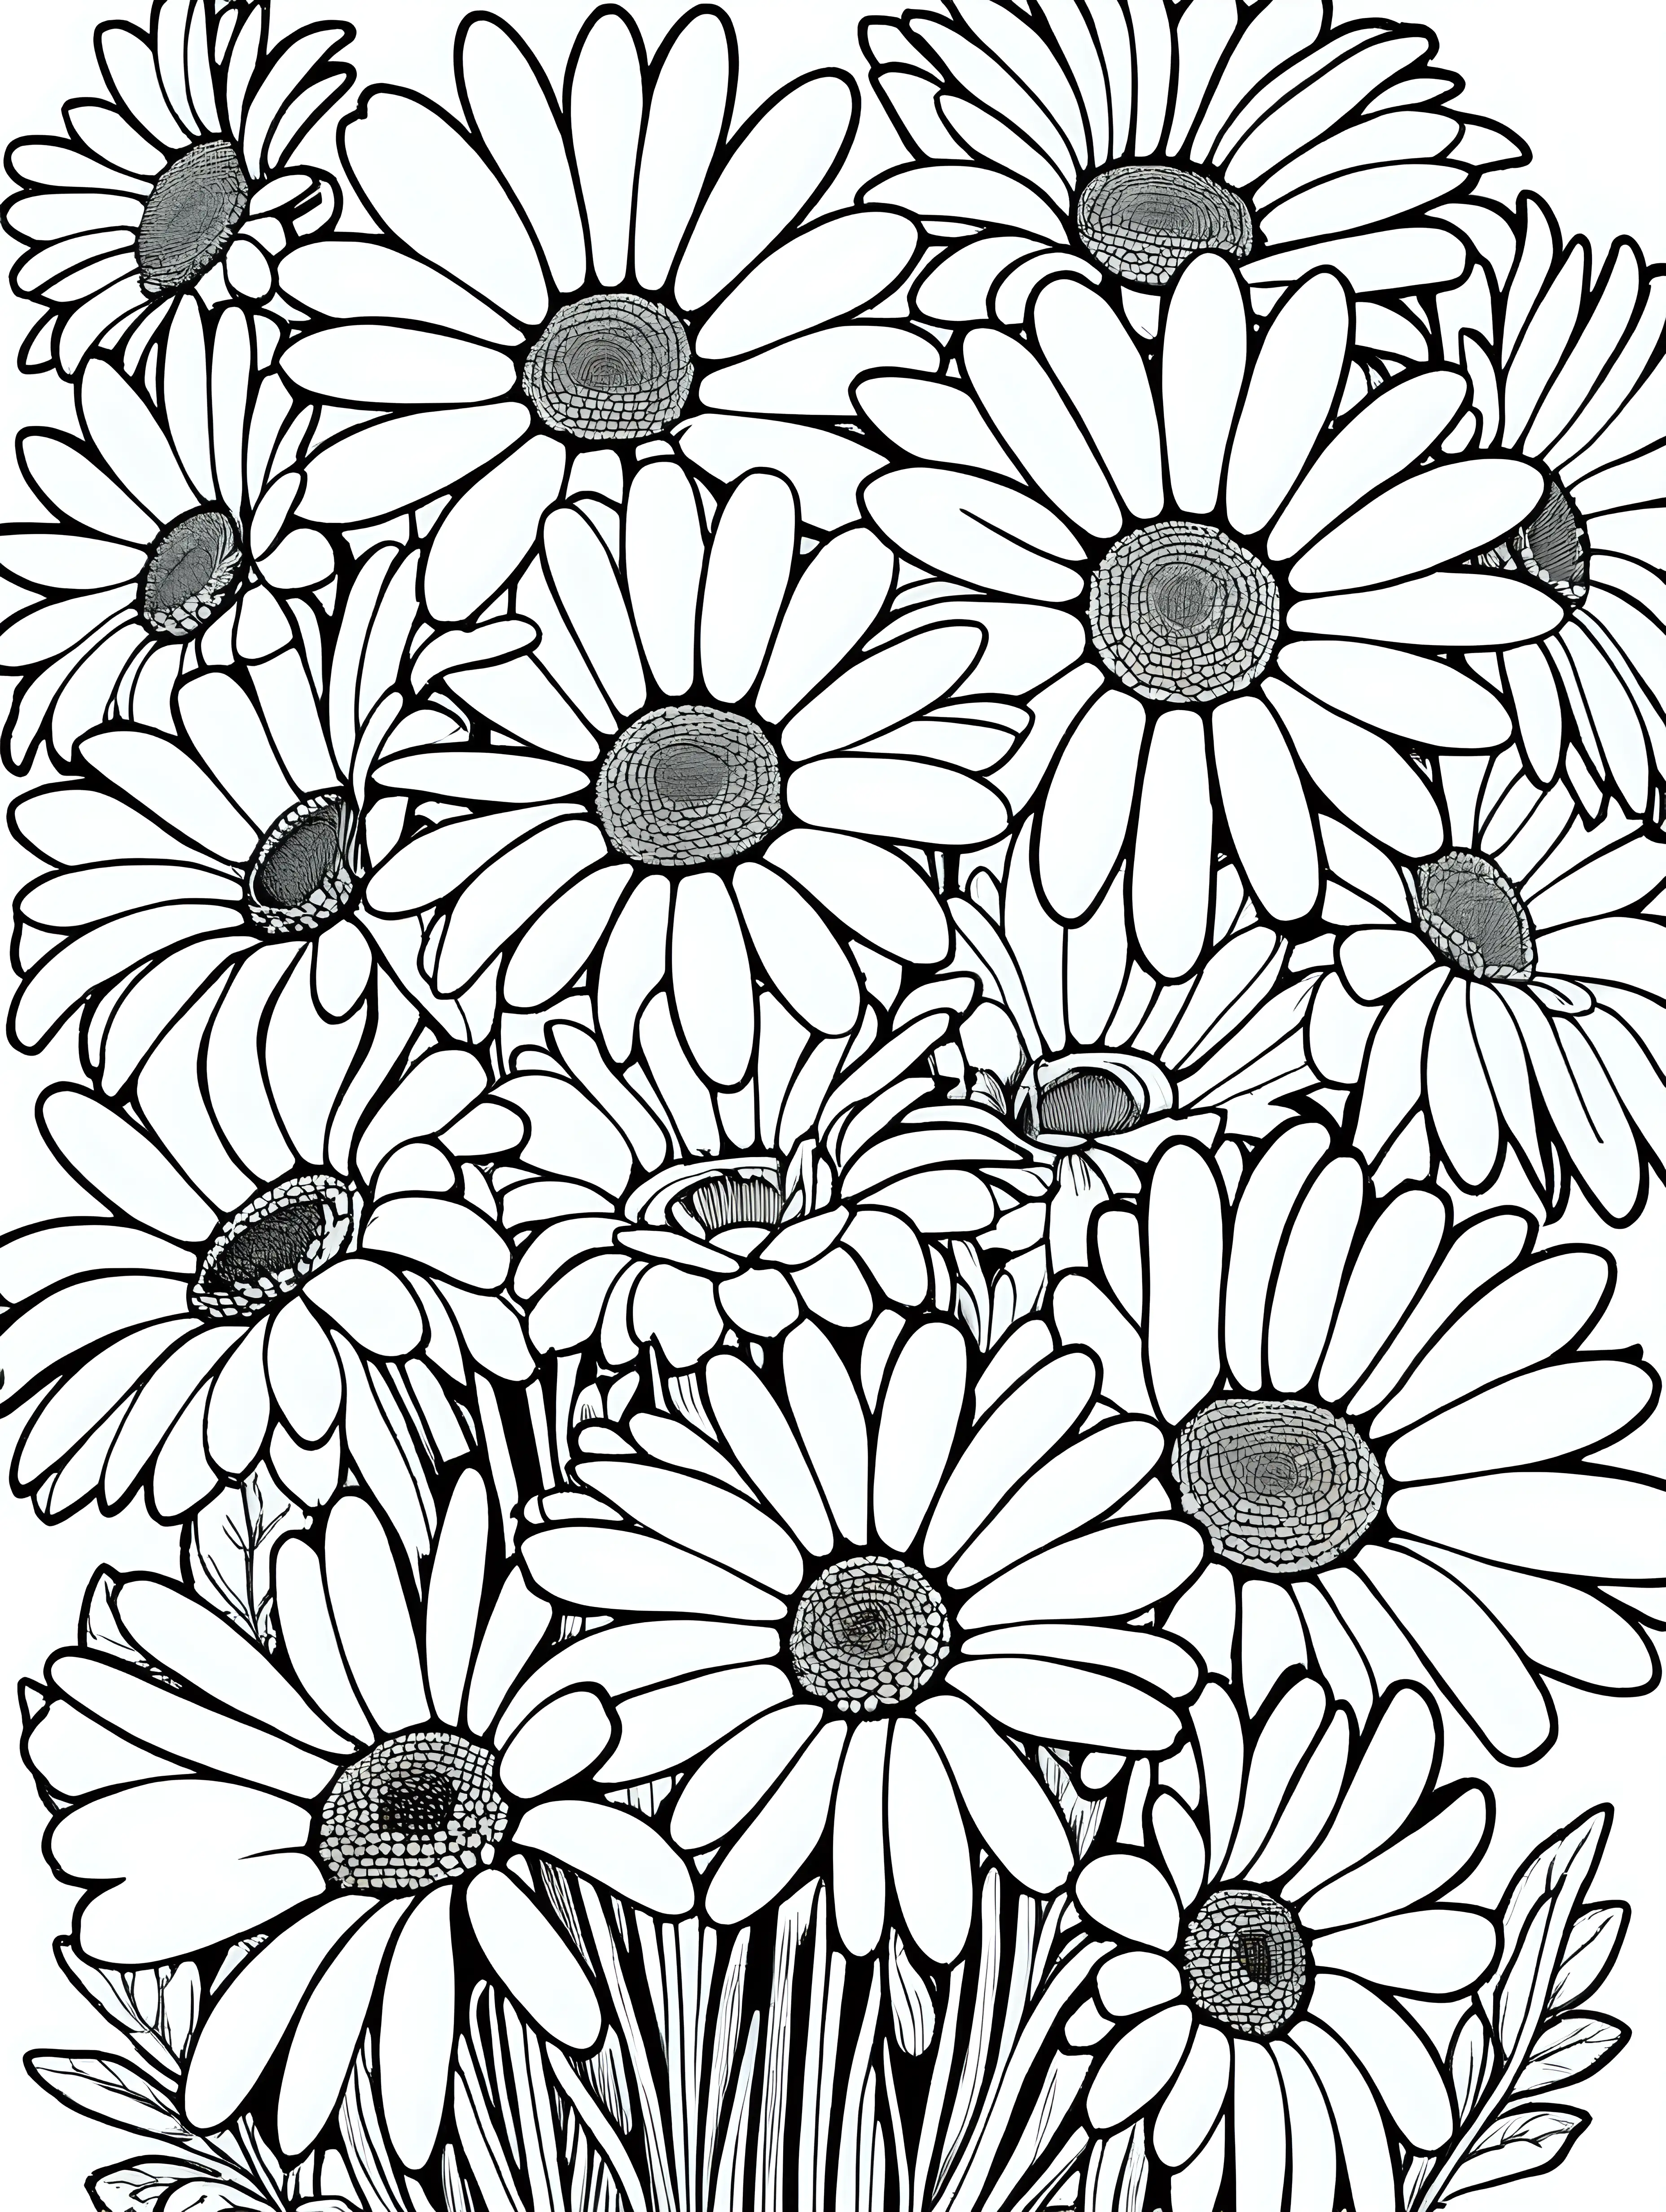 A arrangement of large daisy flowers filling the entire page black and white coloring page, cartoon style, thin lines, few details, no background, no shadows, no greys